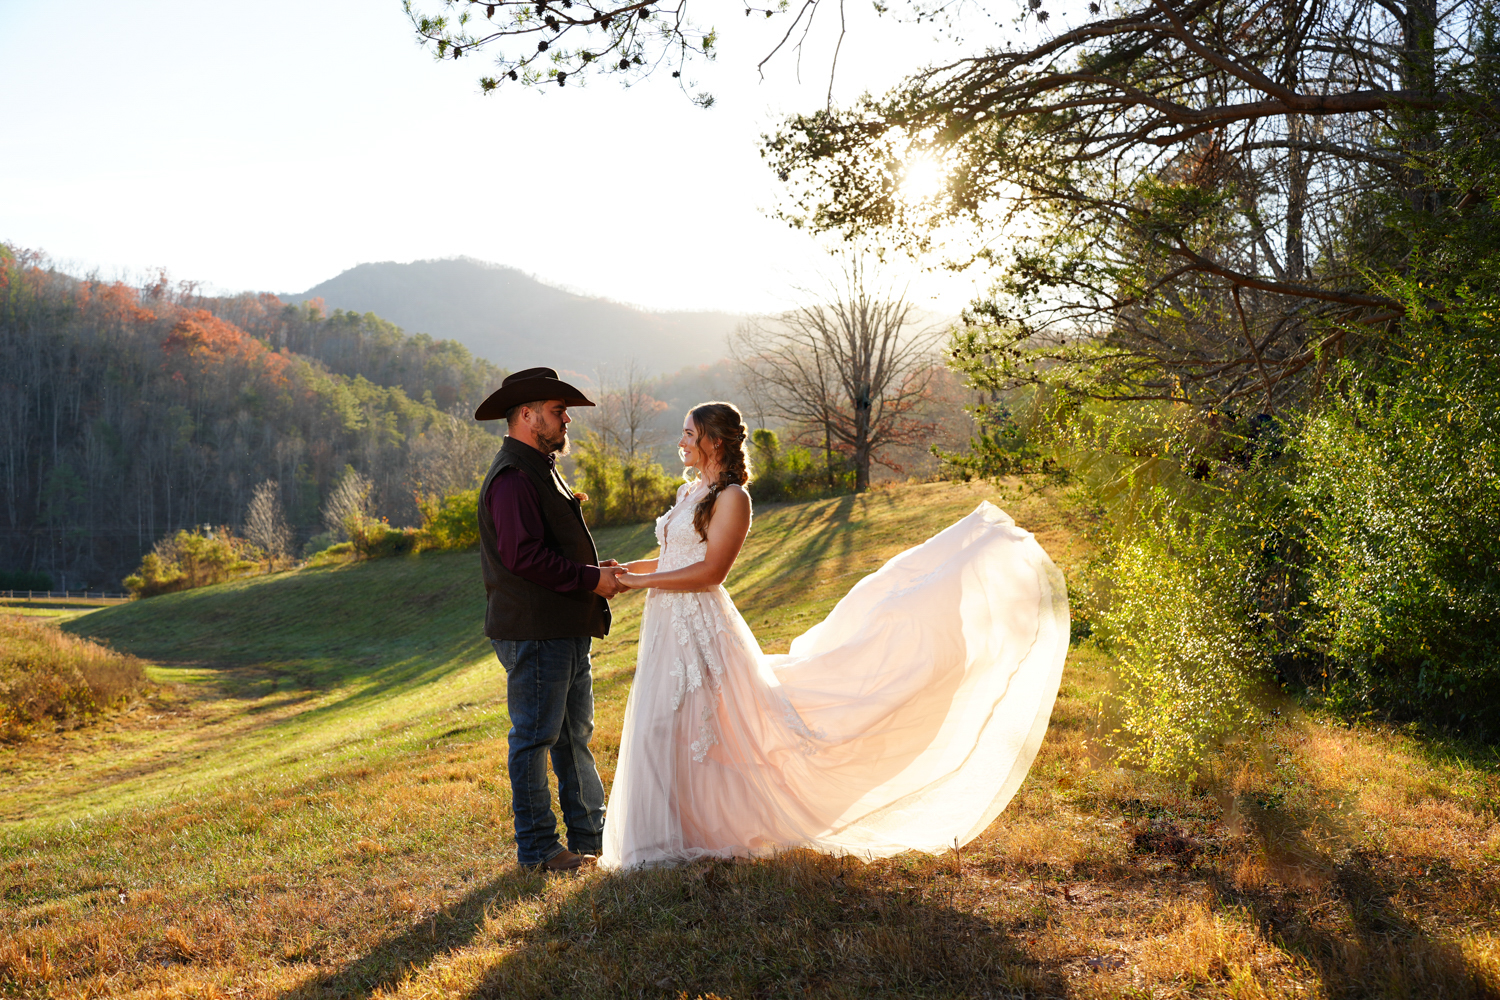 Bride's dress flowing in the wind in a field with a mountain view on her wedding day as she holds her groom's hand